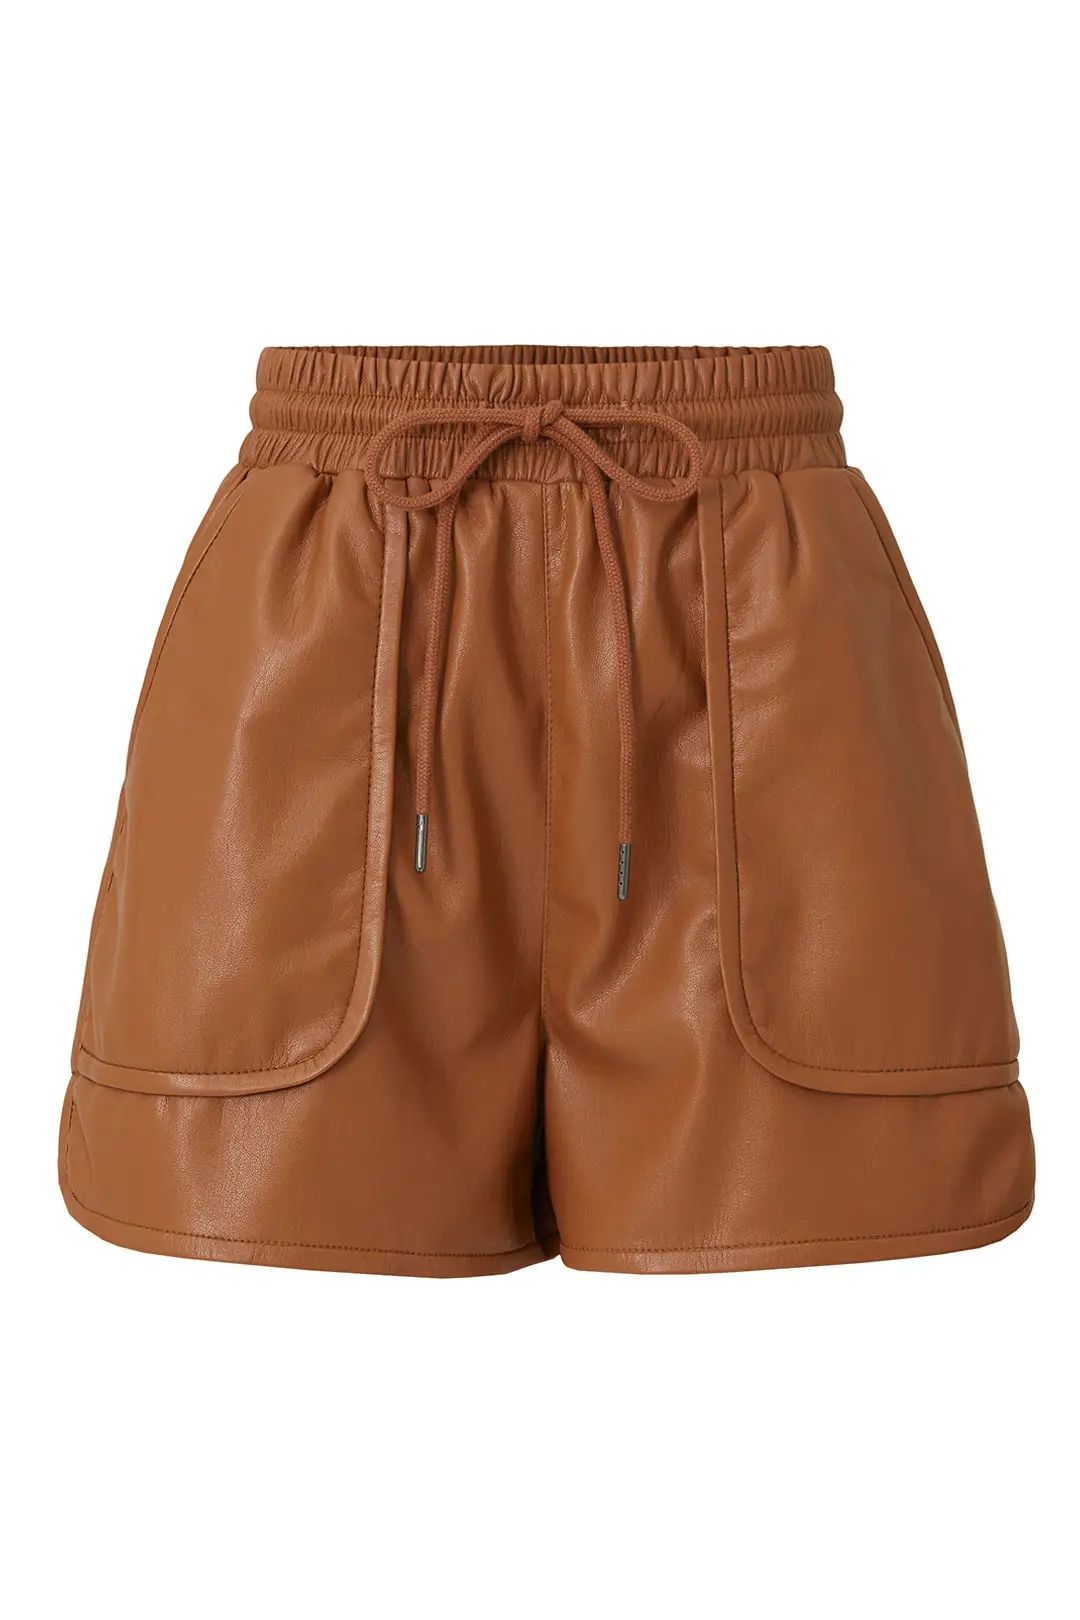 Joie Faux Leather Regan Shorts | Rent the Runway